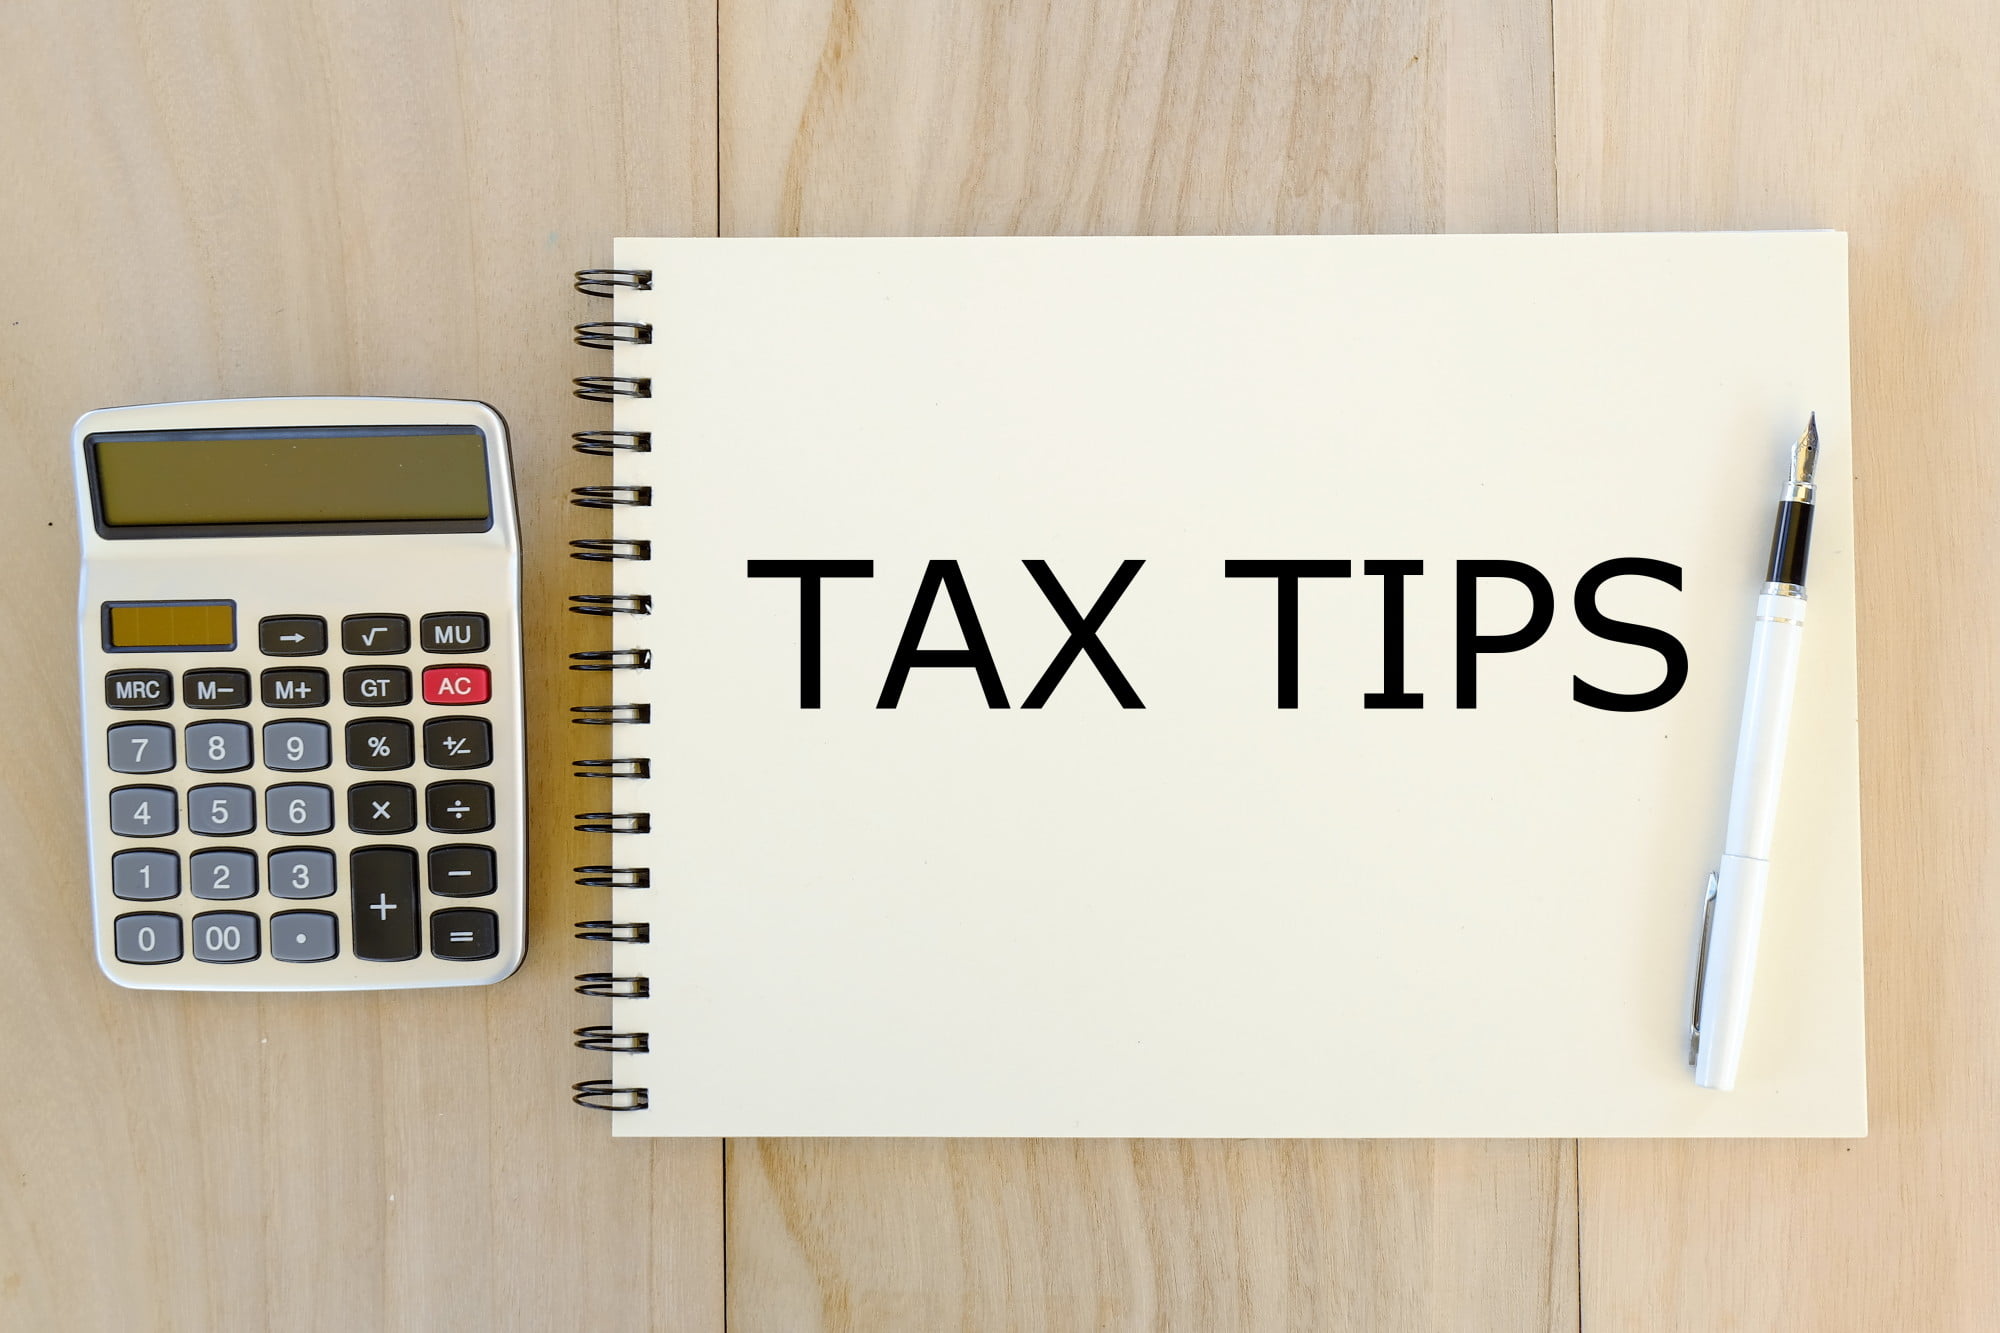 Self-employment has a lot of benefits, but things can get complicated when it comes to paying taxes. That's why you need to check out these tax tips.